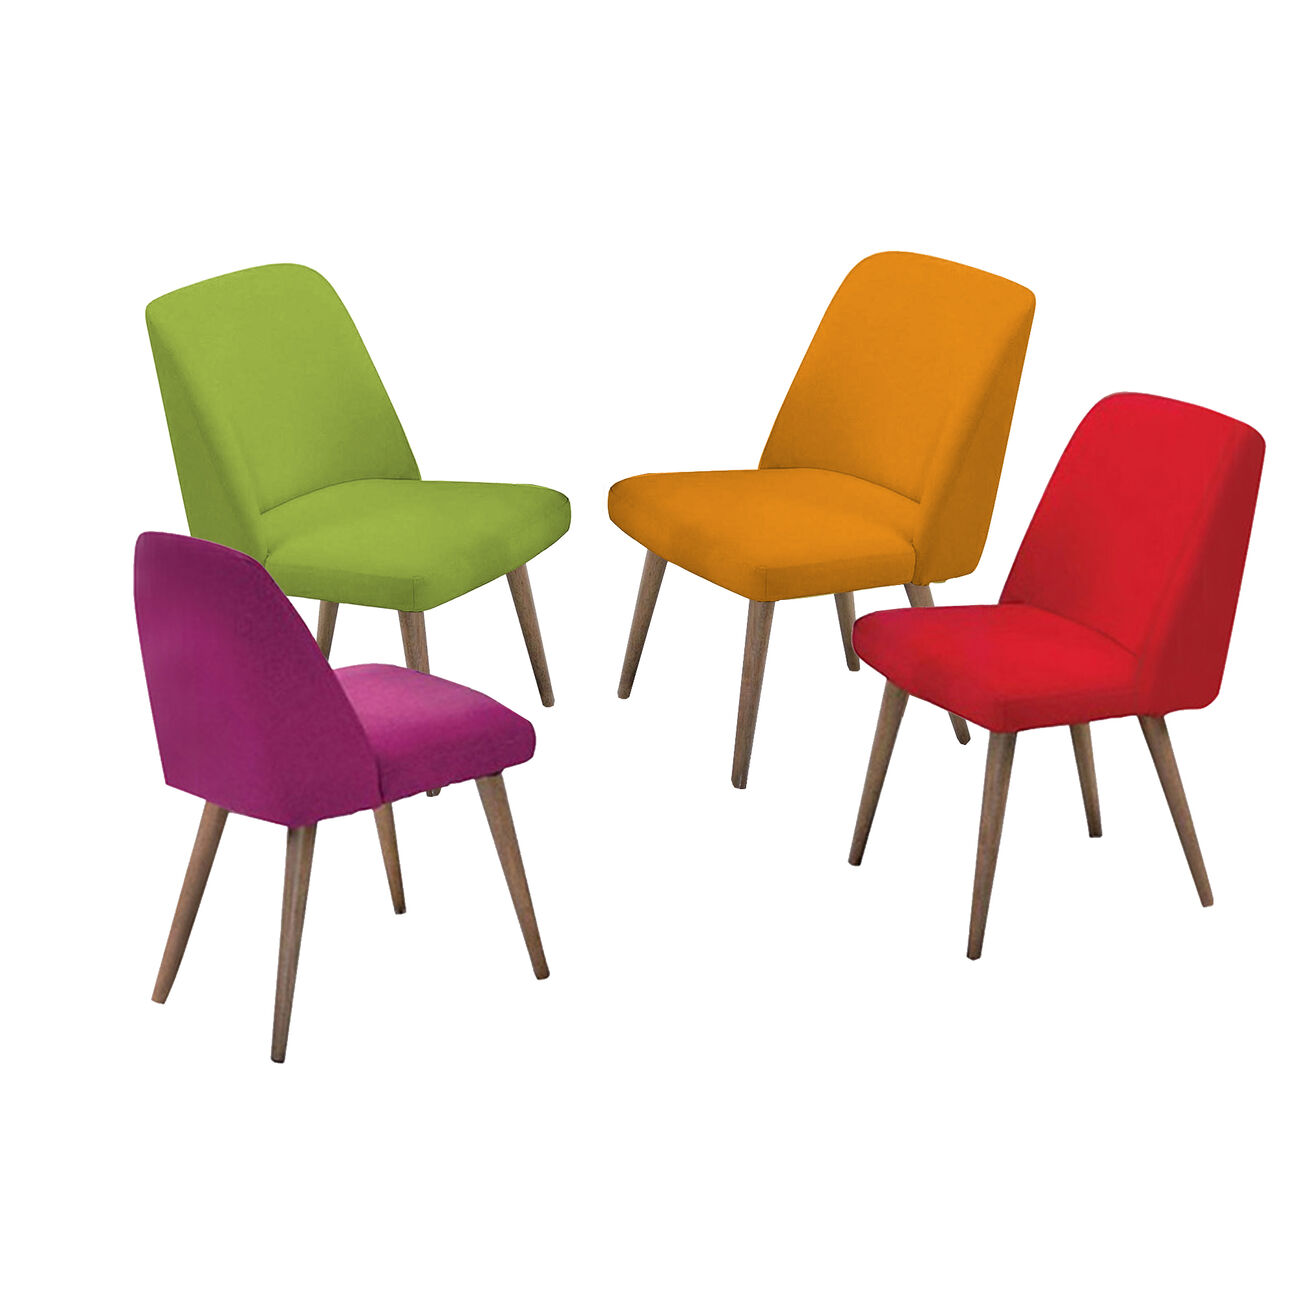 Wooden Side chairs, Pack of 4, (Green, Pink, Red, Orange)